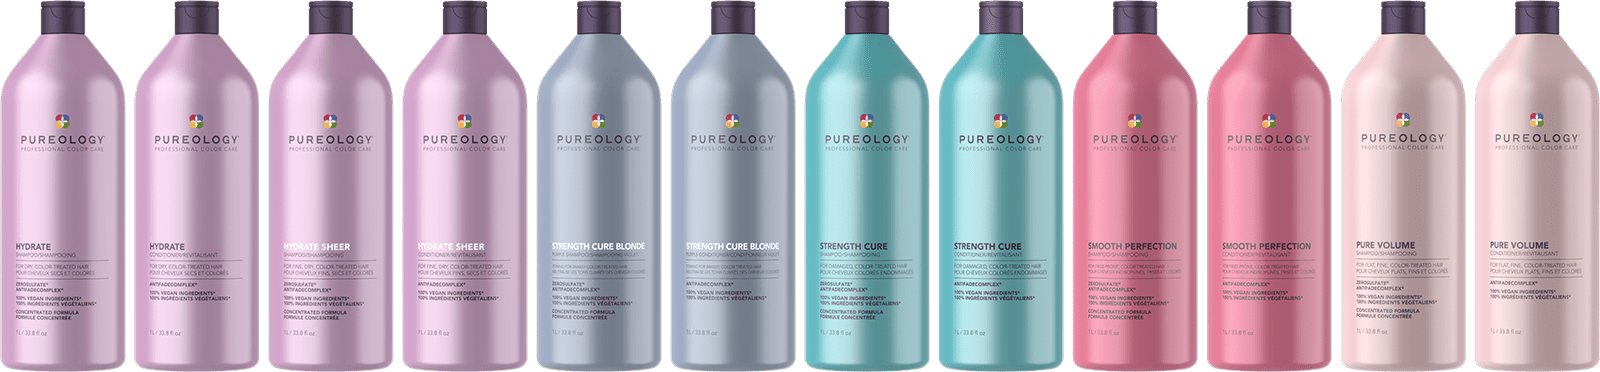 Pureology liters products lineup